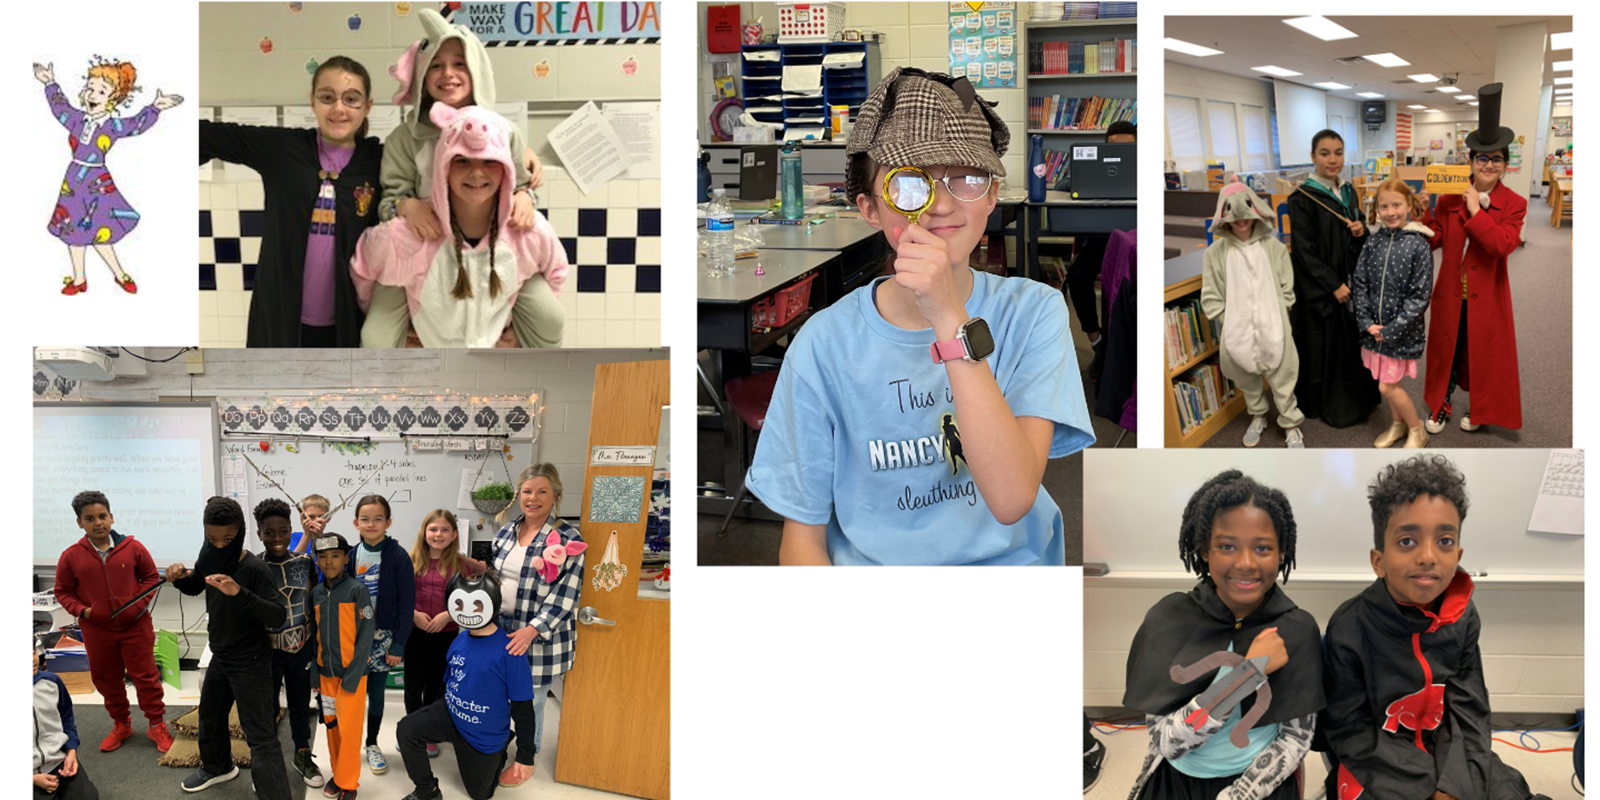 Students and staff dressed as book characters